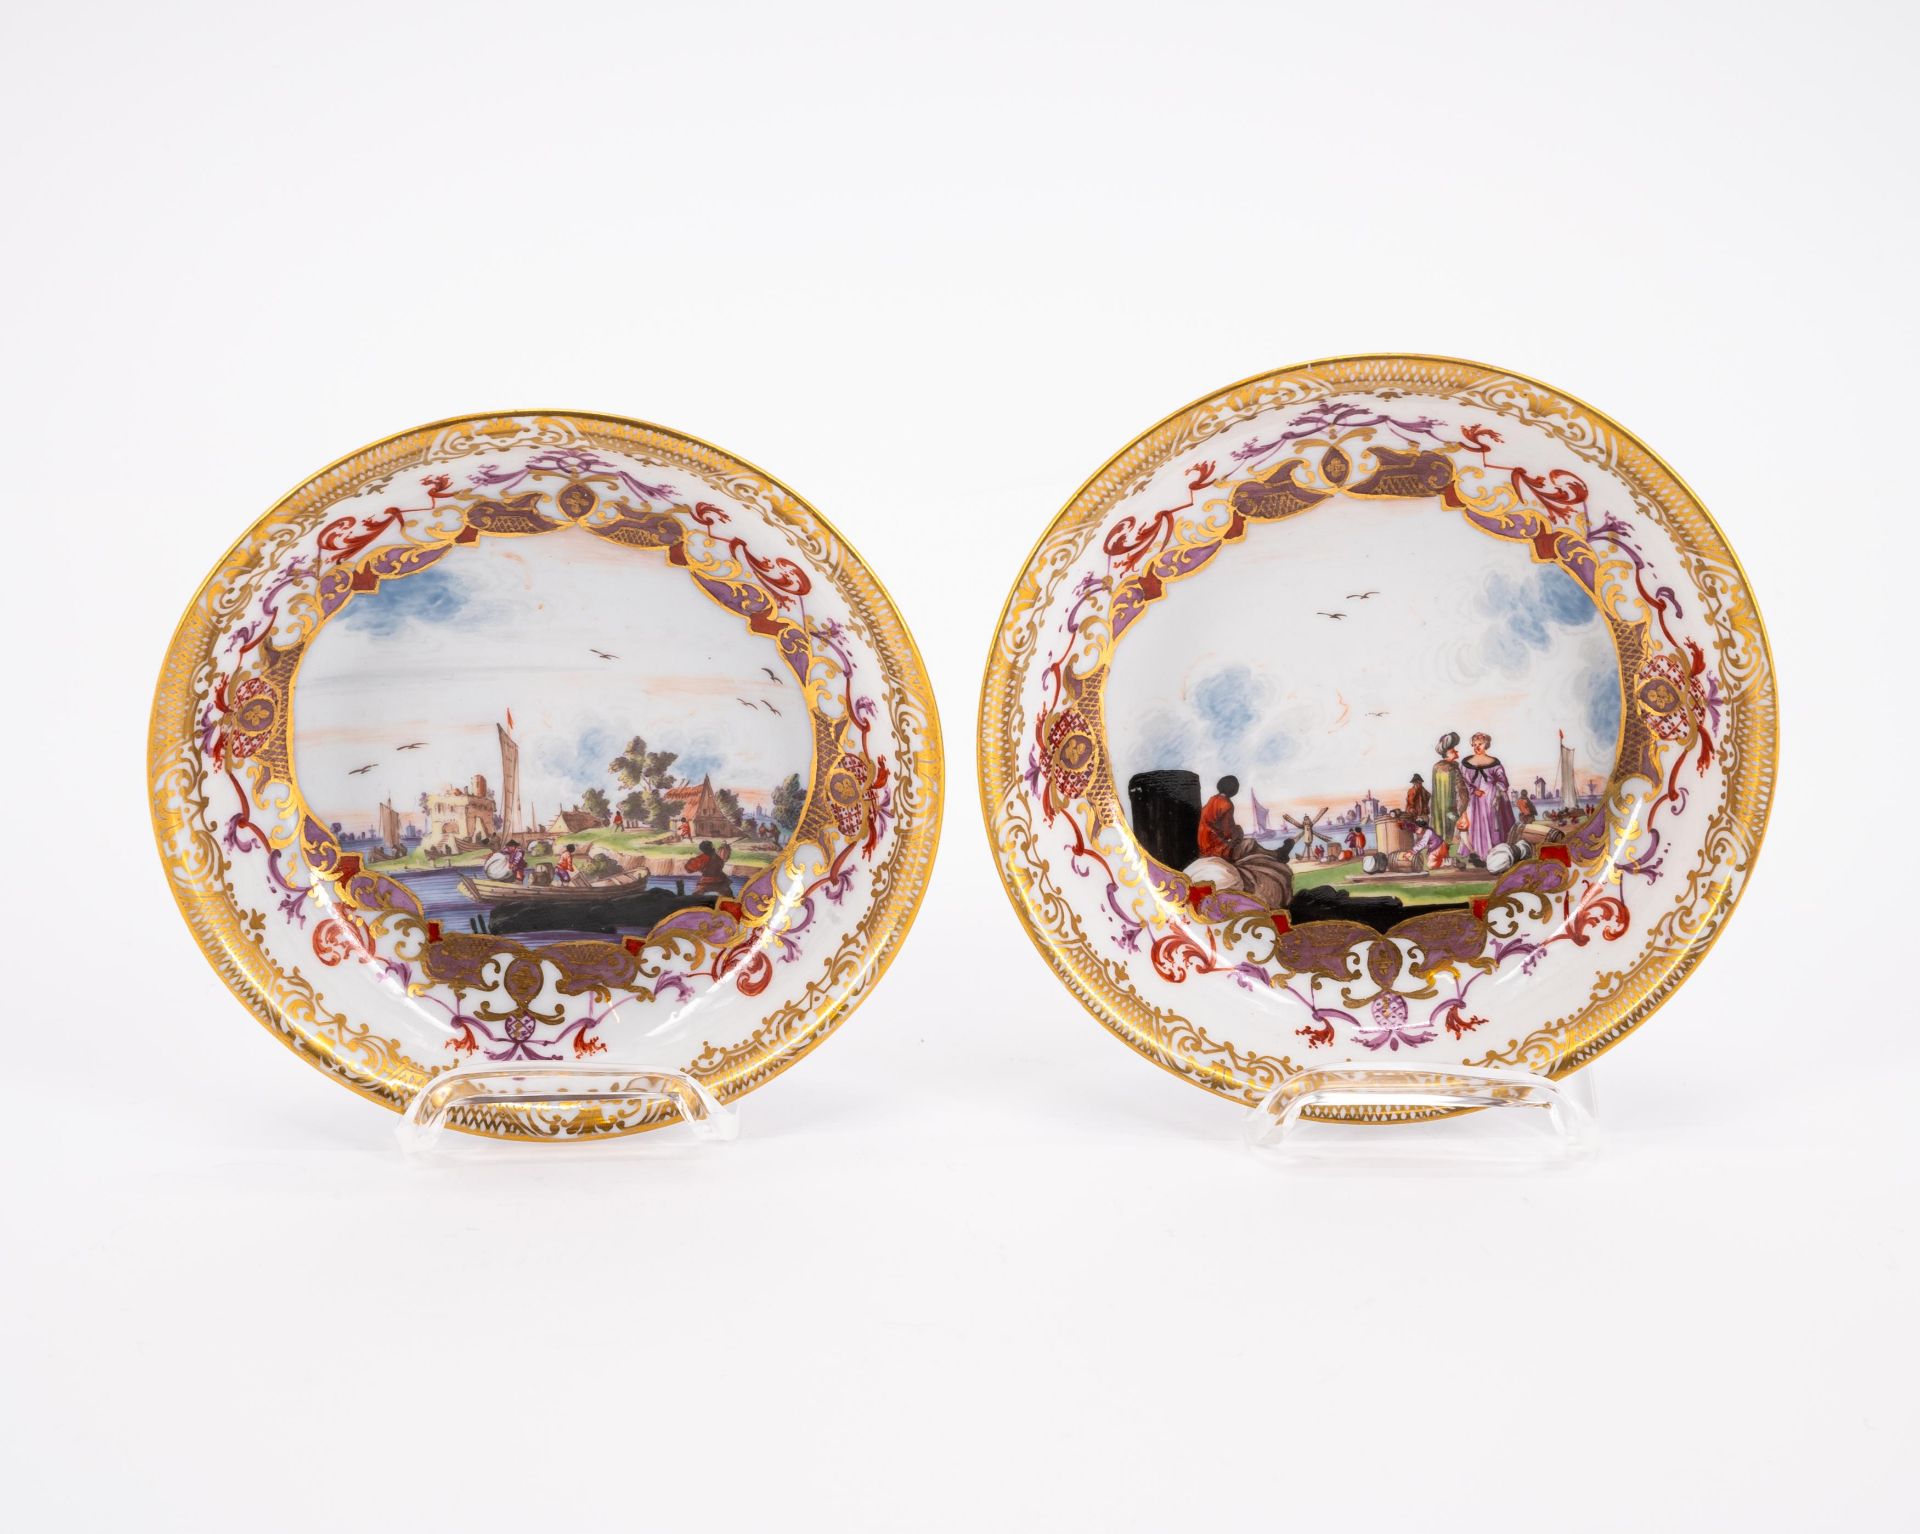 Meissen: PAIR OF PORCELAIN TEA BOWLS AND SAUCERS WITH MERCHANT NAVY SCENES - Image 7 of 8